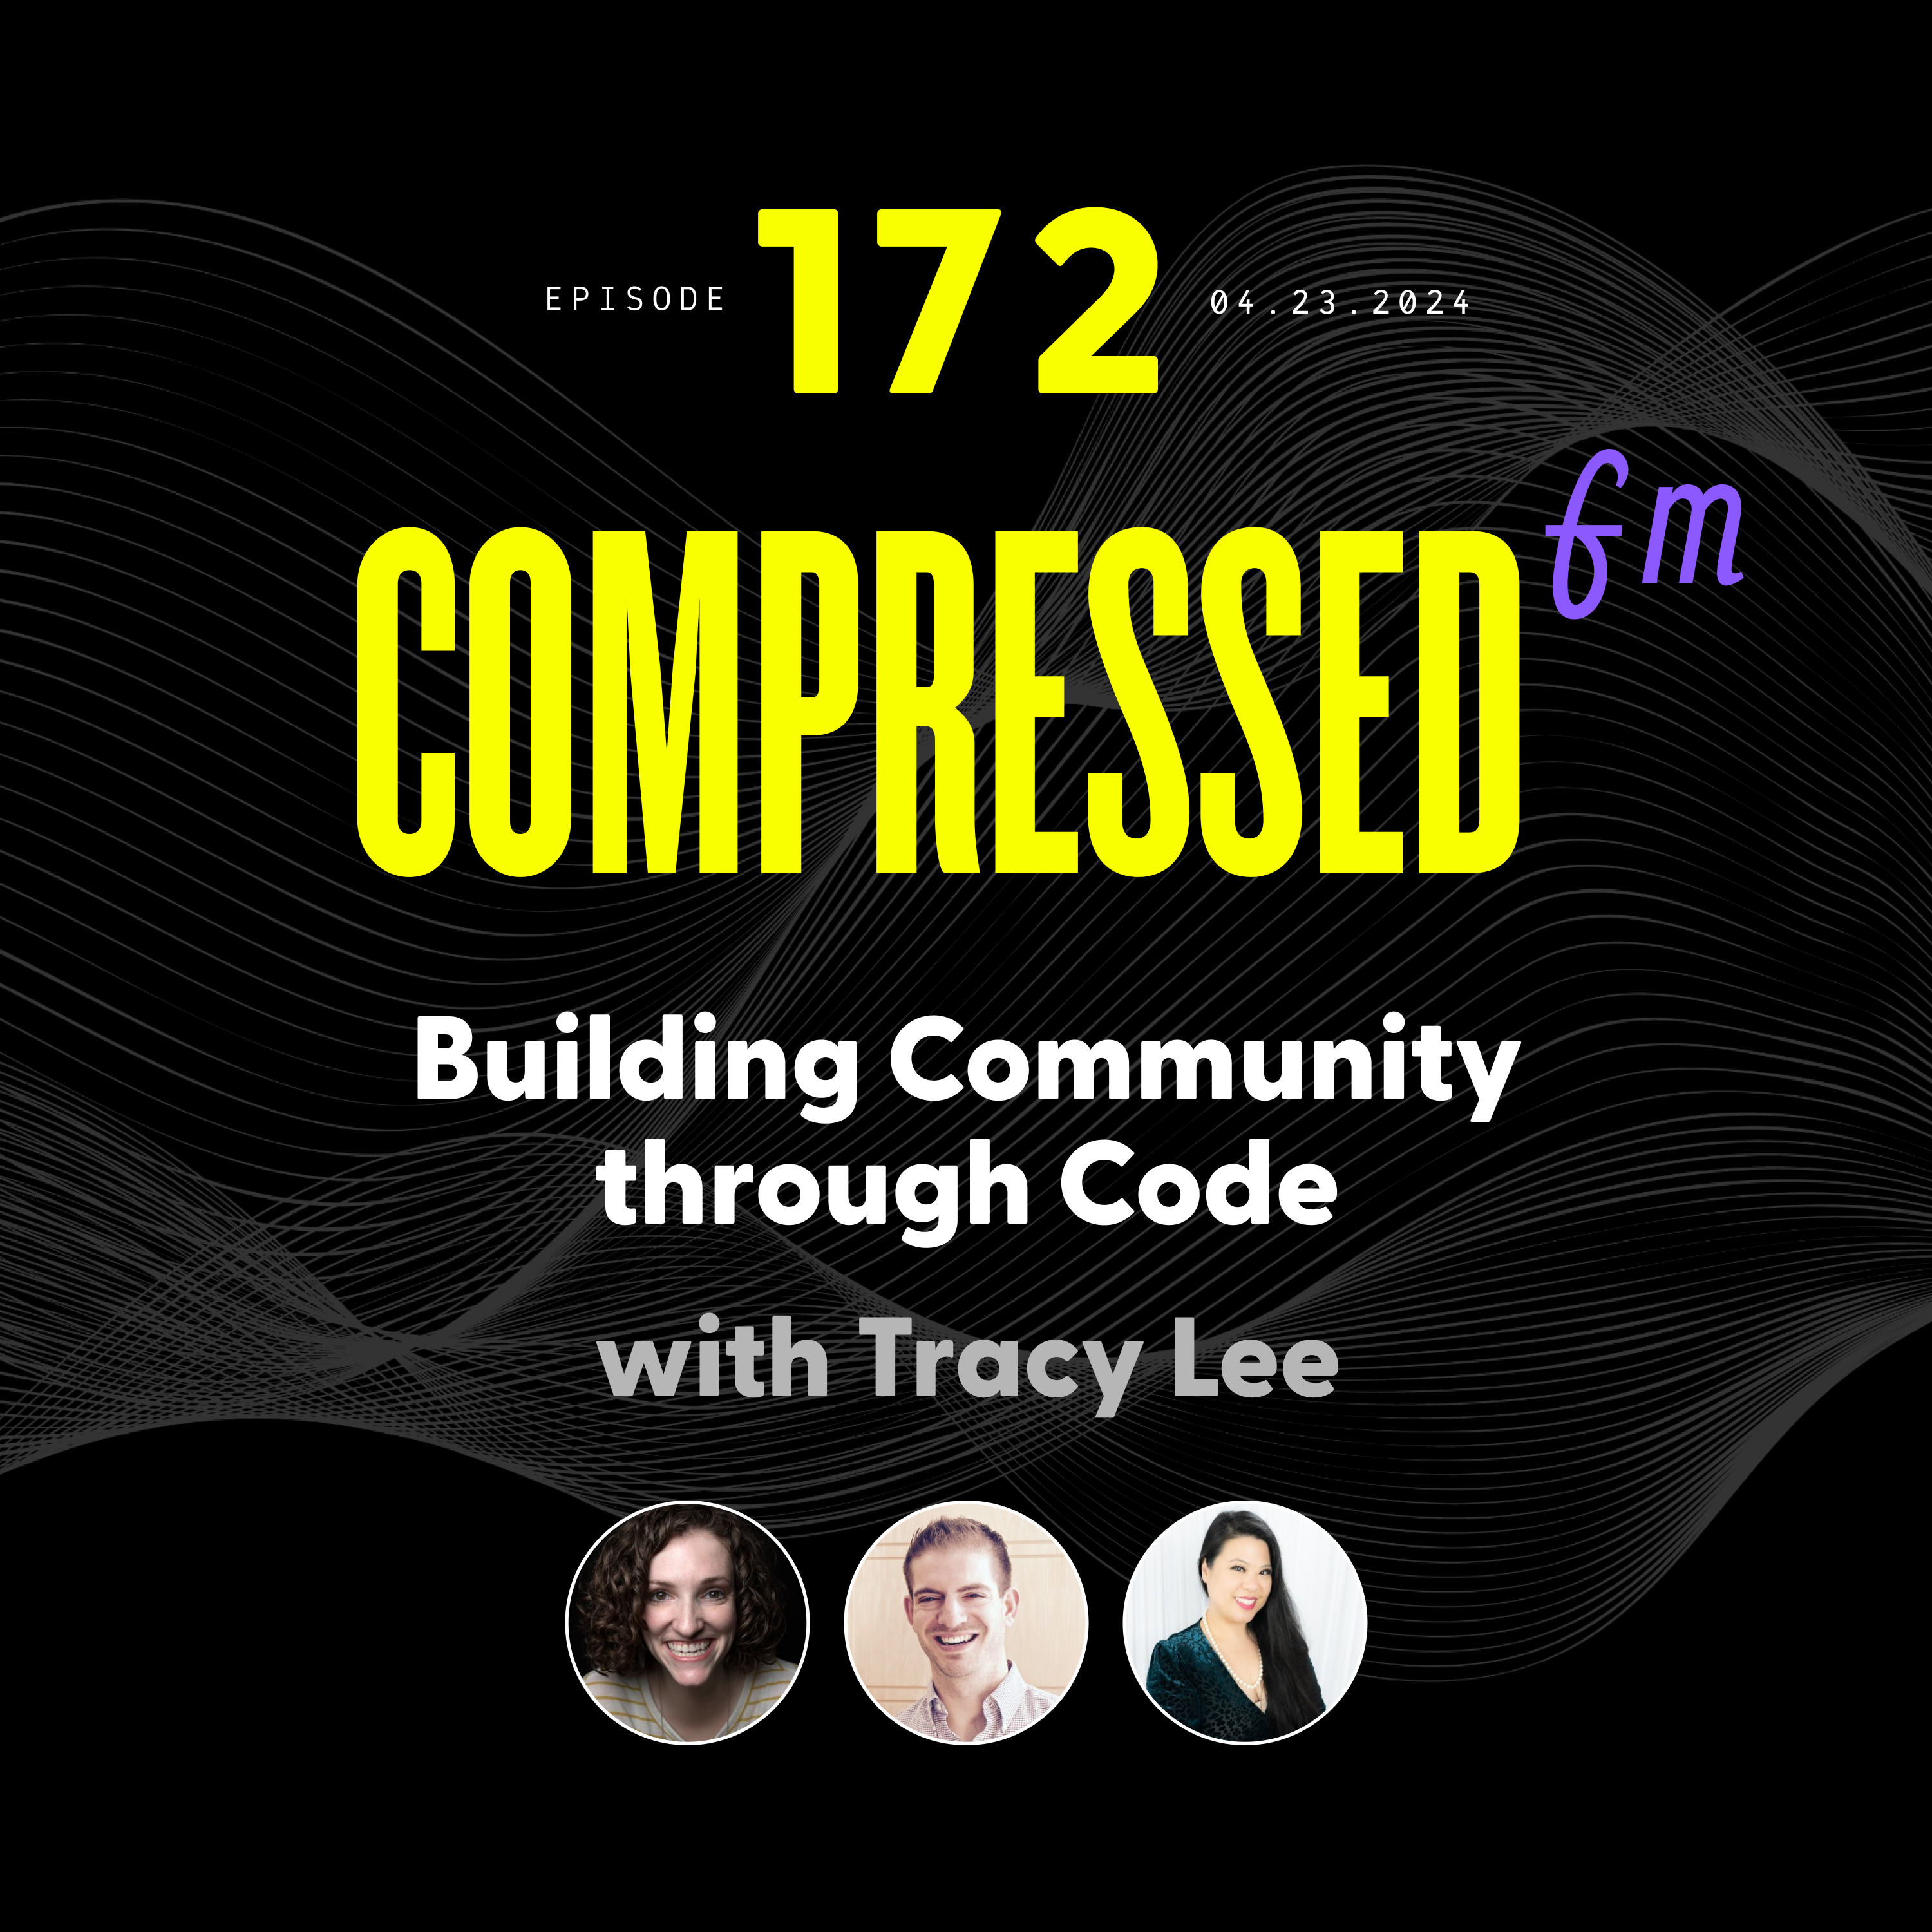 Building Community through Code with Tracy Lee